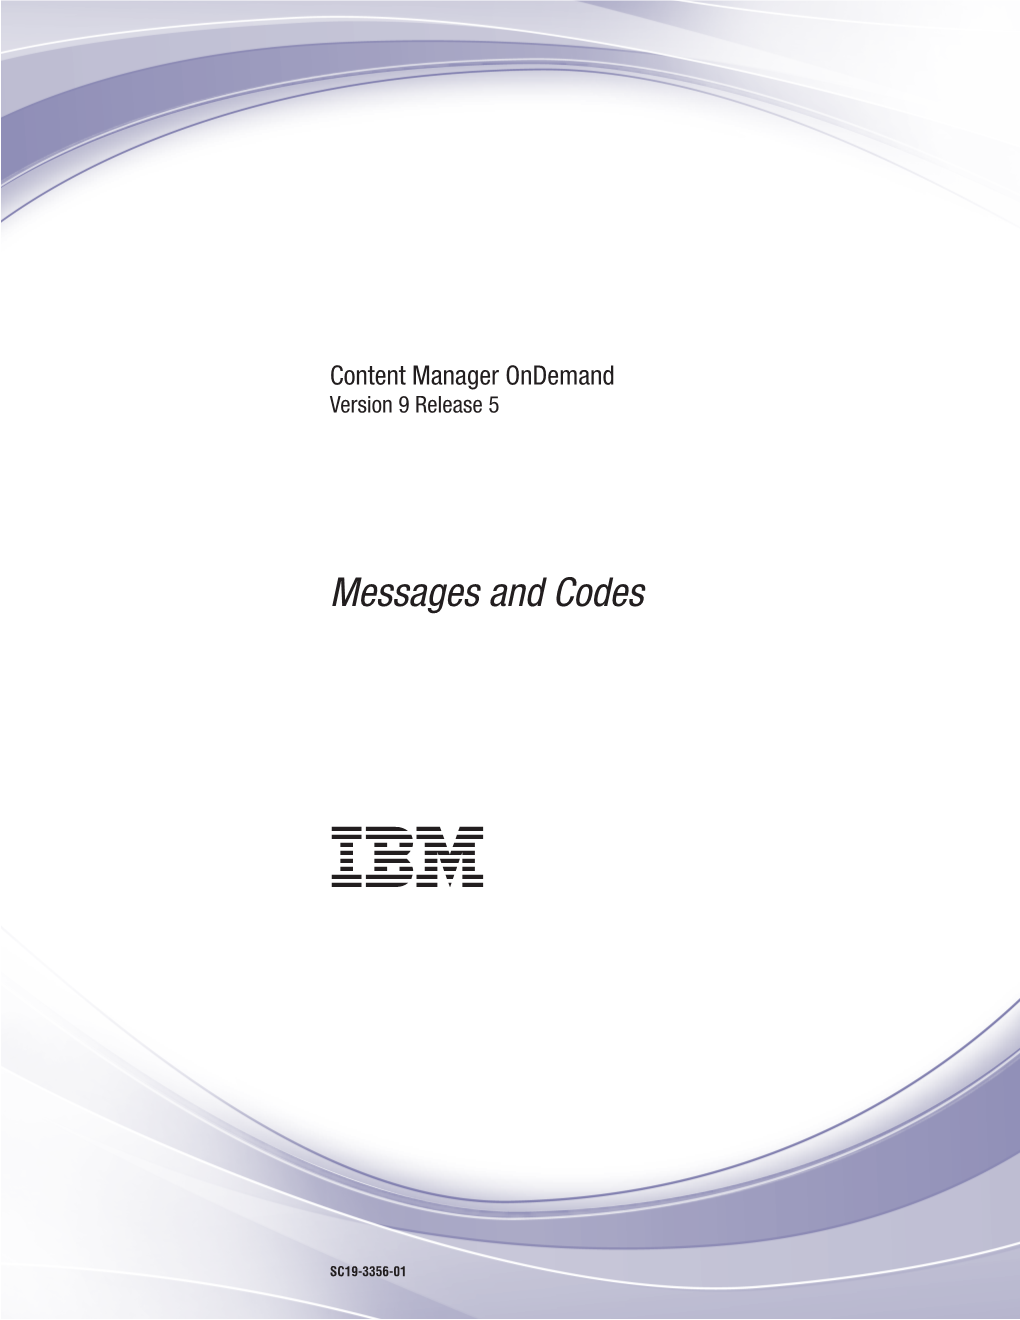 OD Messages and Codes Ibm.Com and Related Resources